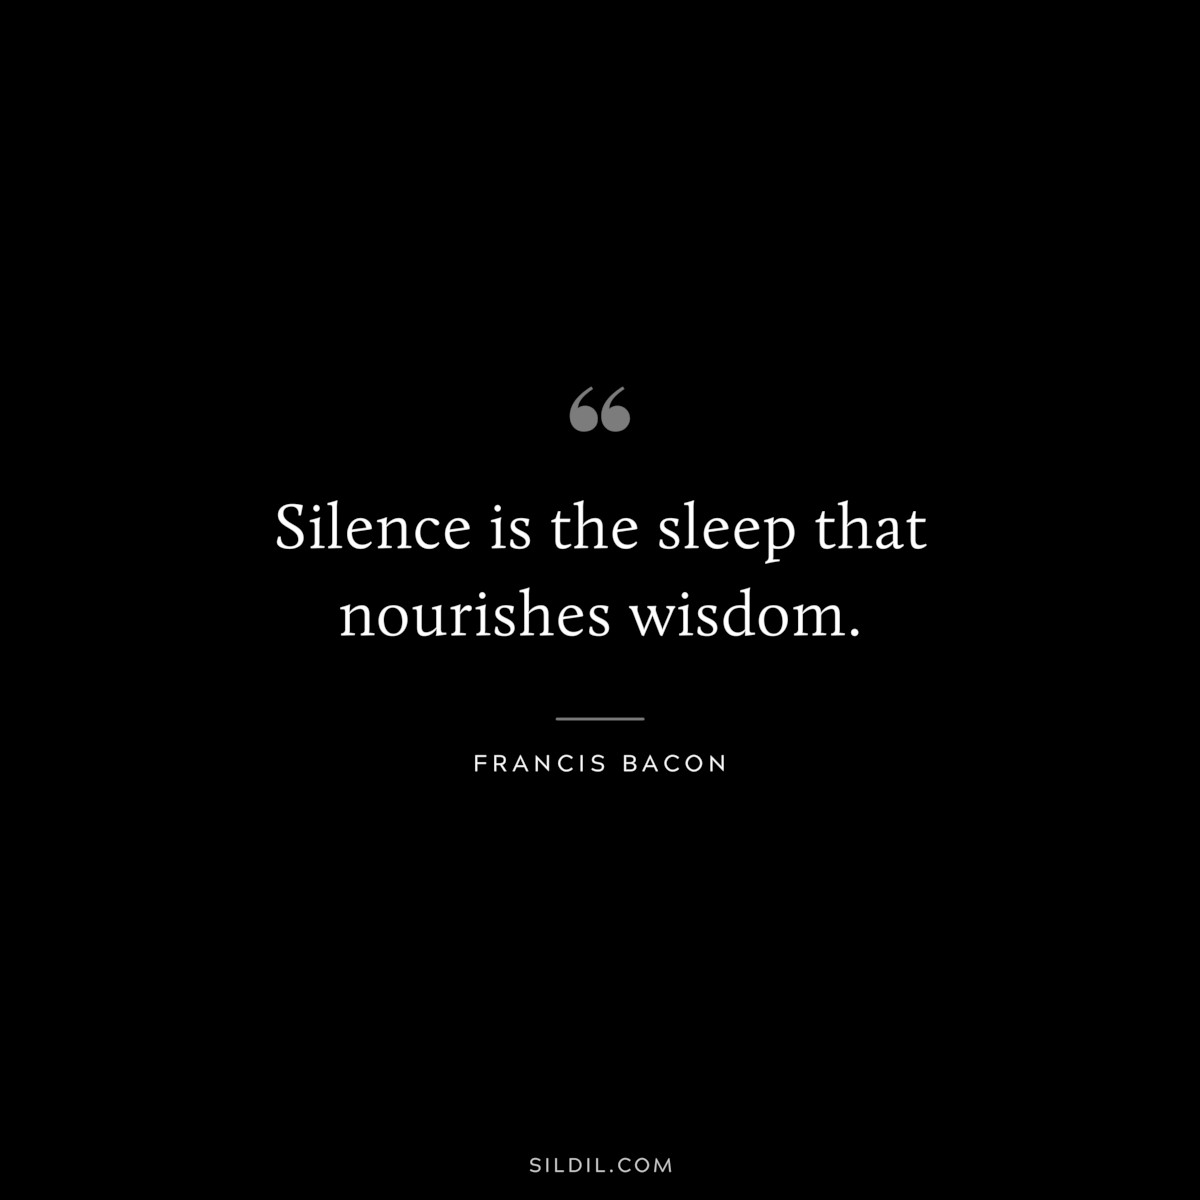 Silence is the sleep that nourishes wisdom. ― Francis Bacon